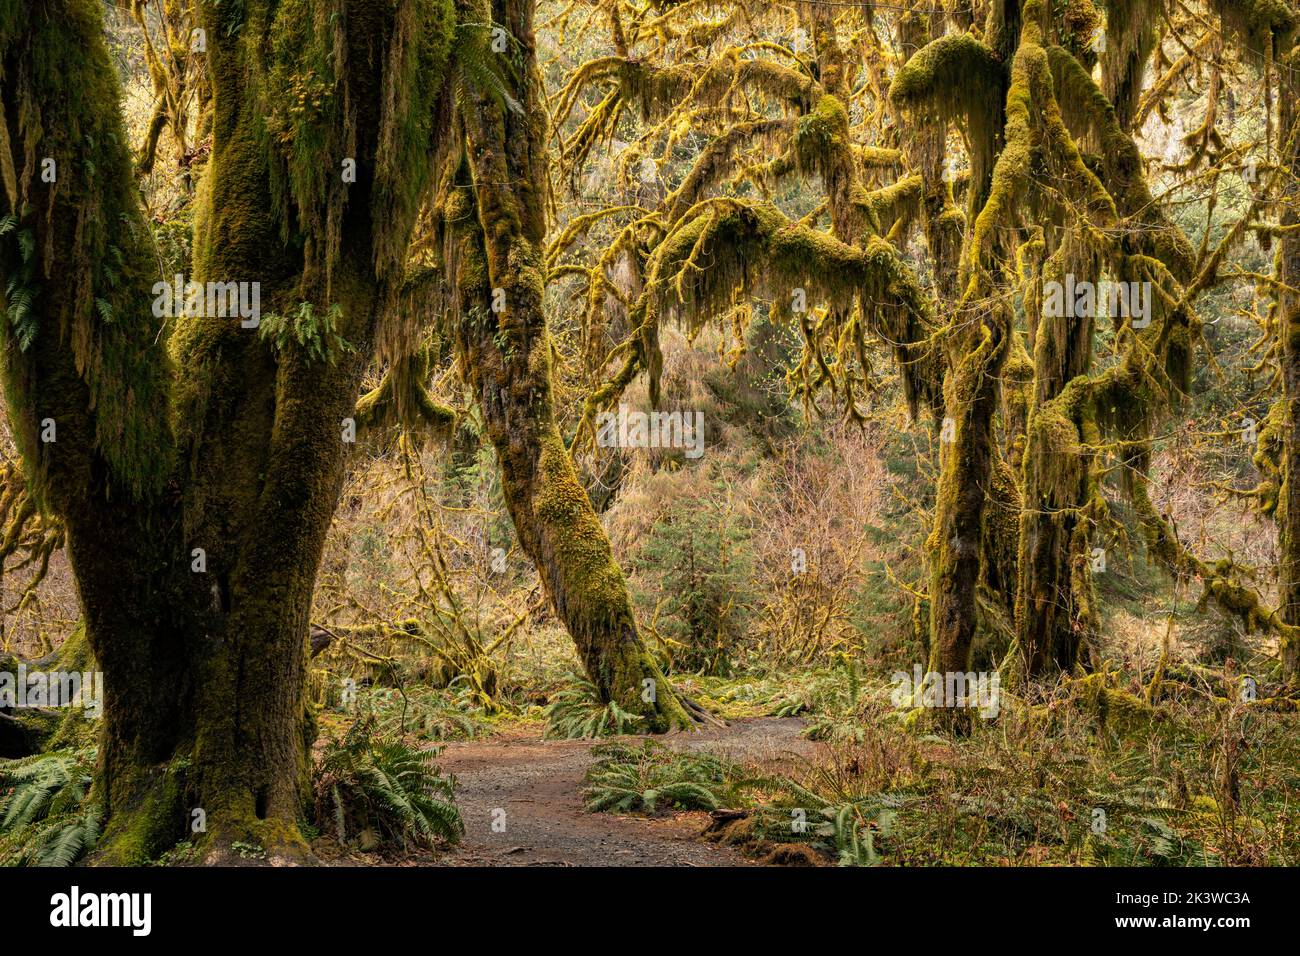 WA22097-00...WASHINGTON - Maple trees covered with moss  in the Hall of Mosses, part of the Hoh Rain Forest , In Olympic National Park. Stock Photo